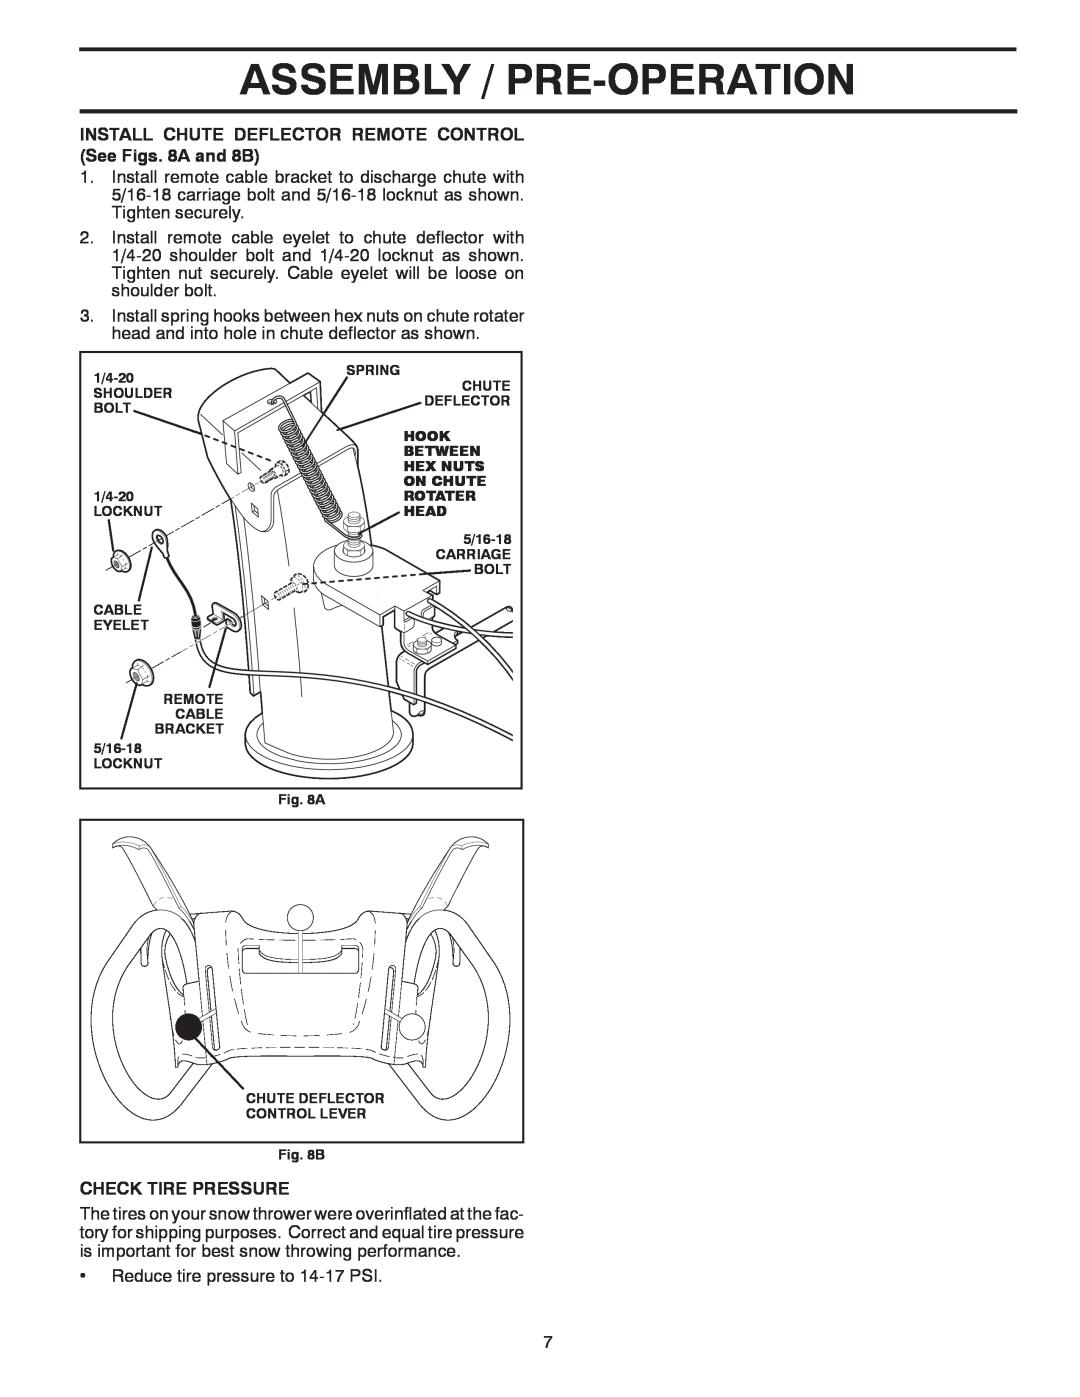 Poulan 96198002701, 429956, PP208EPS24 Assembly / Pre-Operation, INSTALL CHUTE DEFLECTOR REMOTE CONTROL See Figs. 8A and 8B 